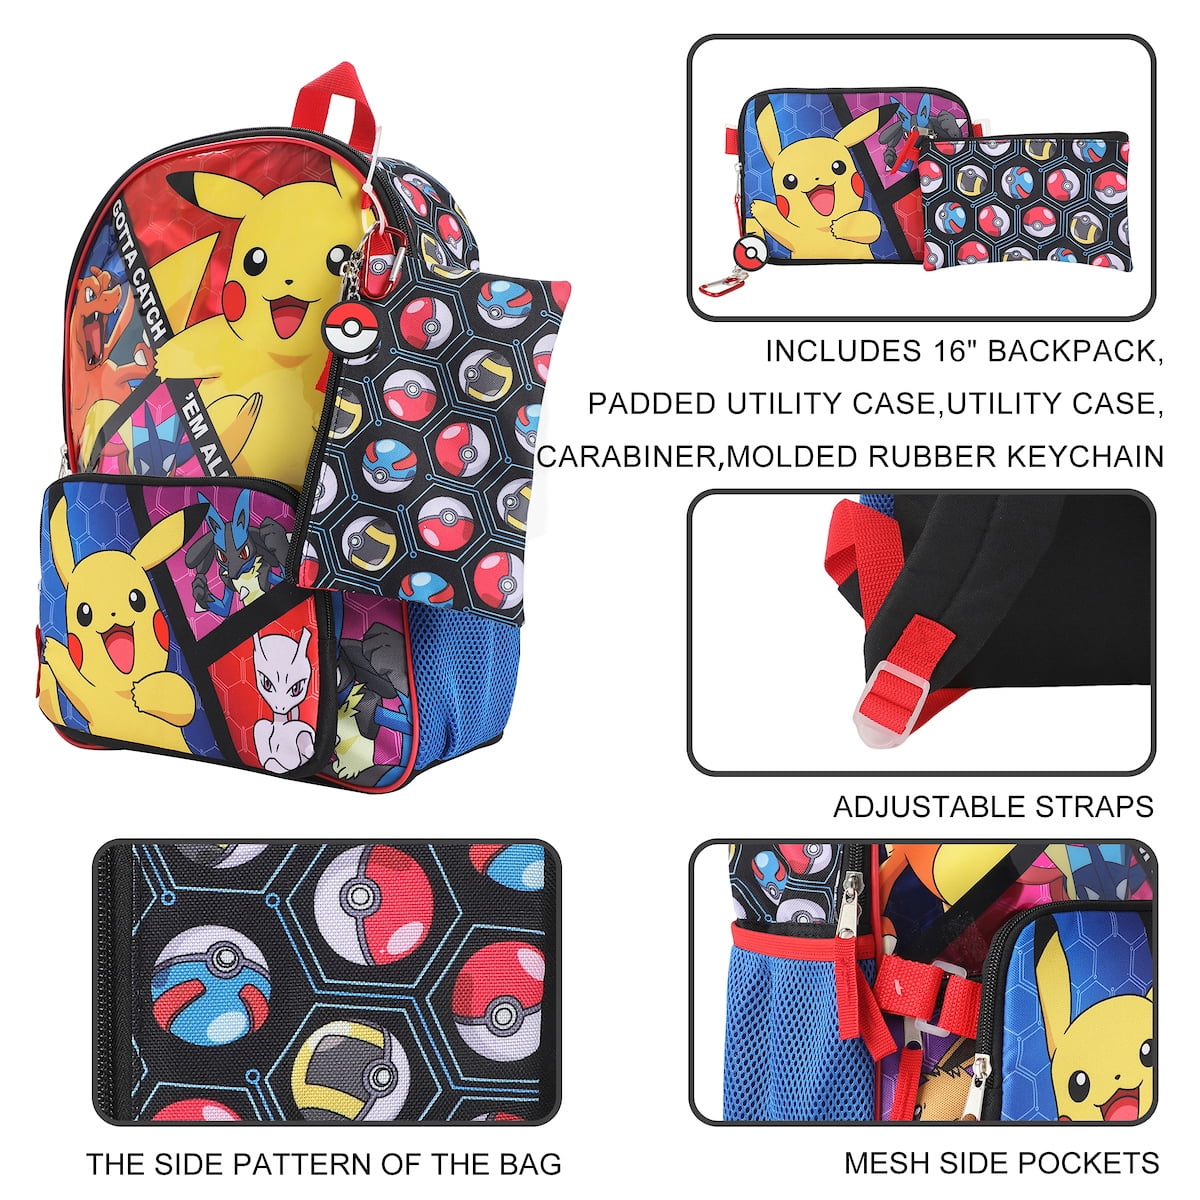 This Pokémon Gear Will Get Your Kids Excited to Go Back to School